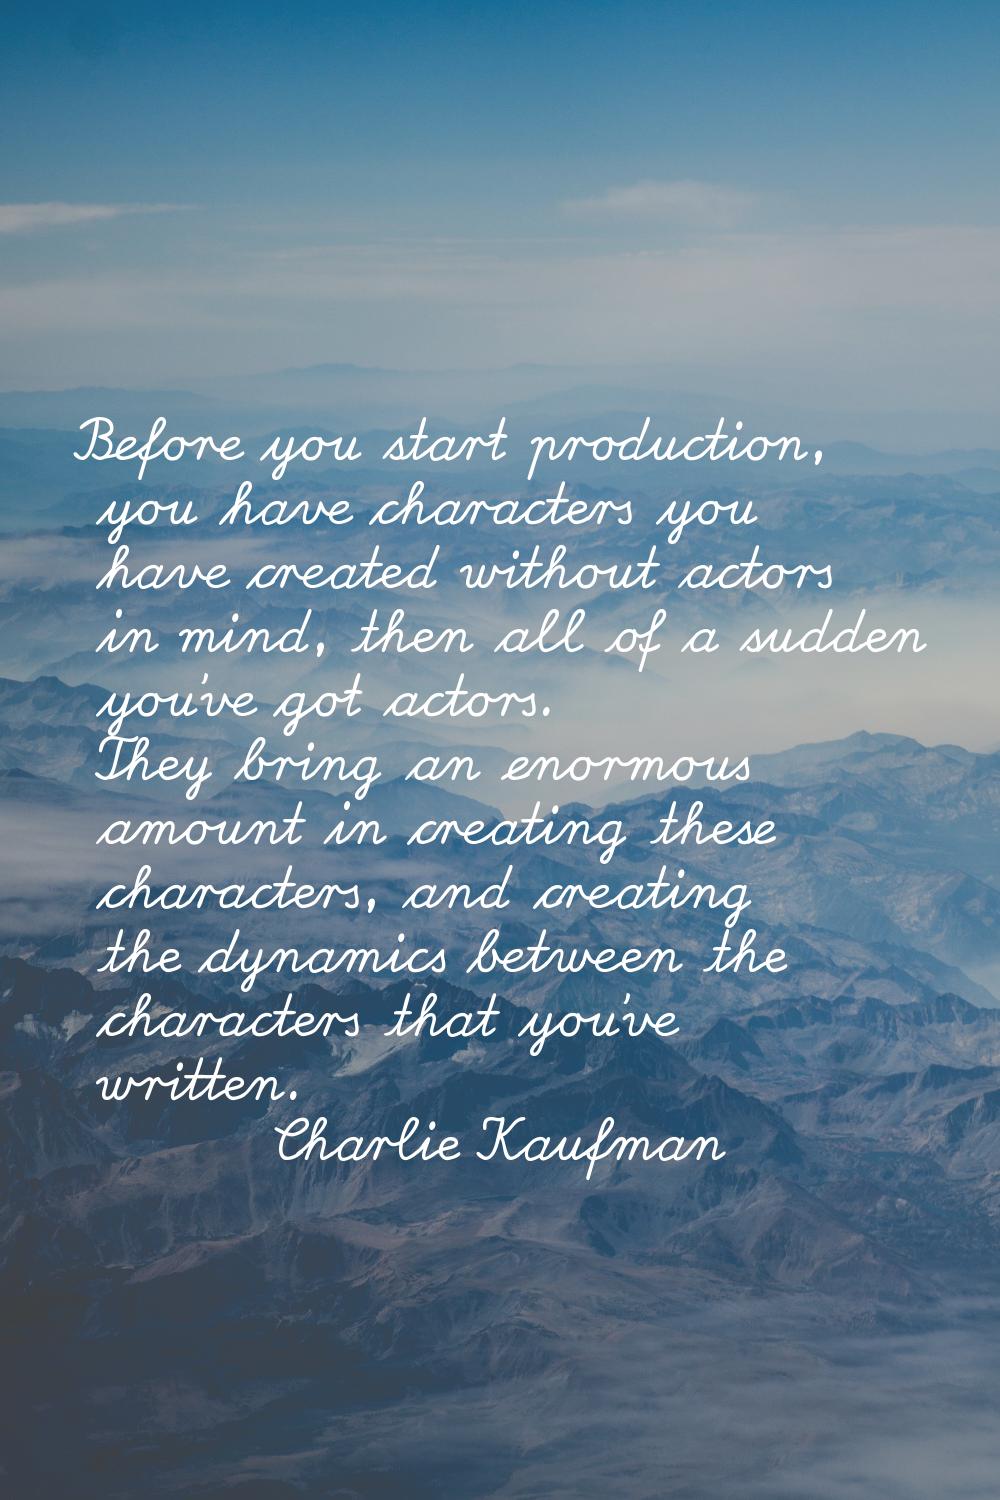 Before you start production, you have characters you have created without actors in mind, then all 